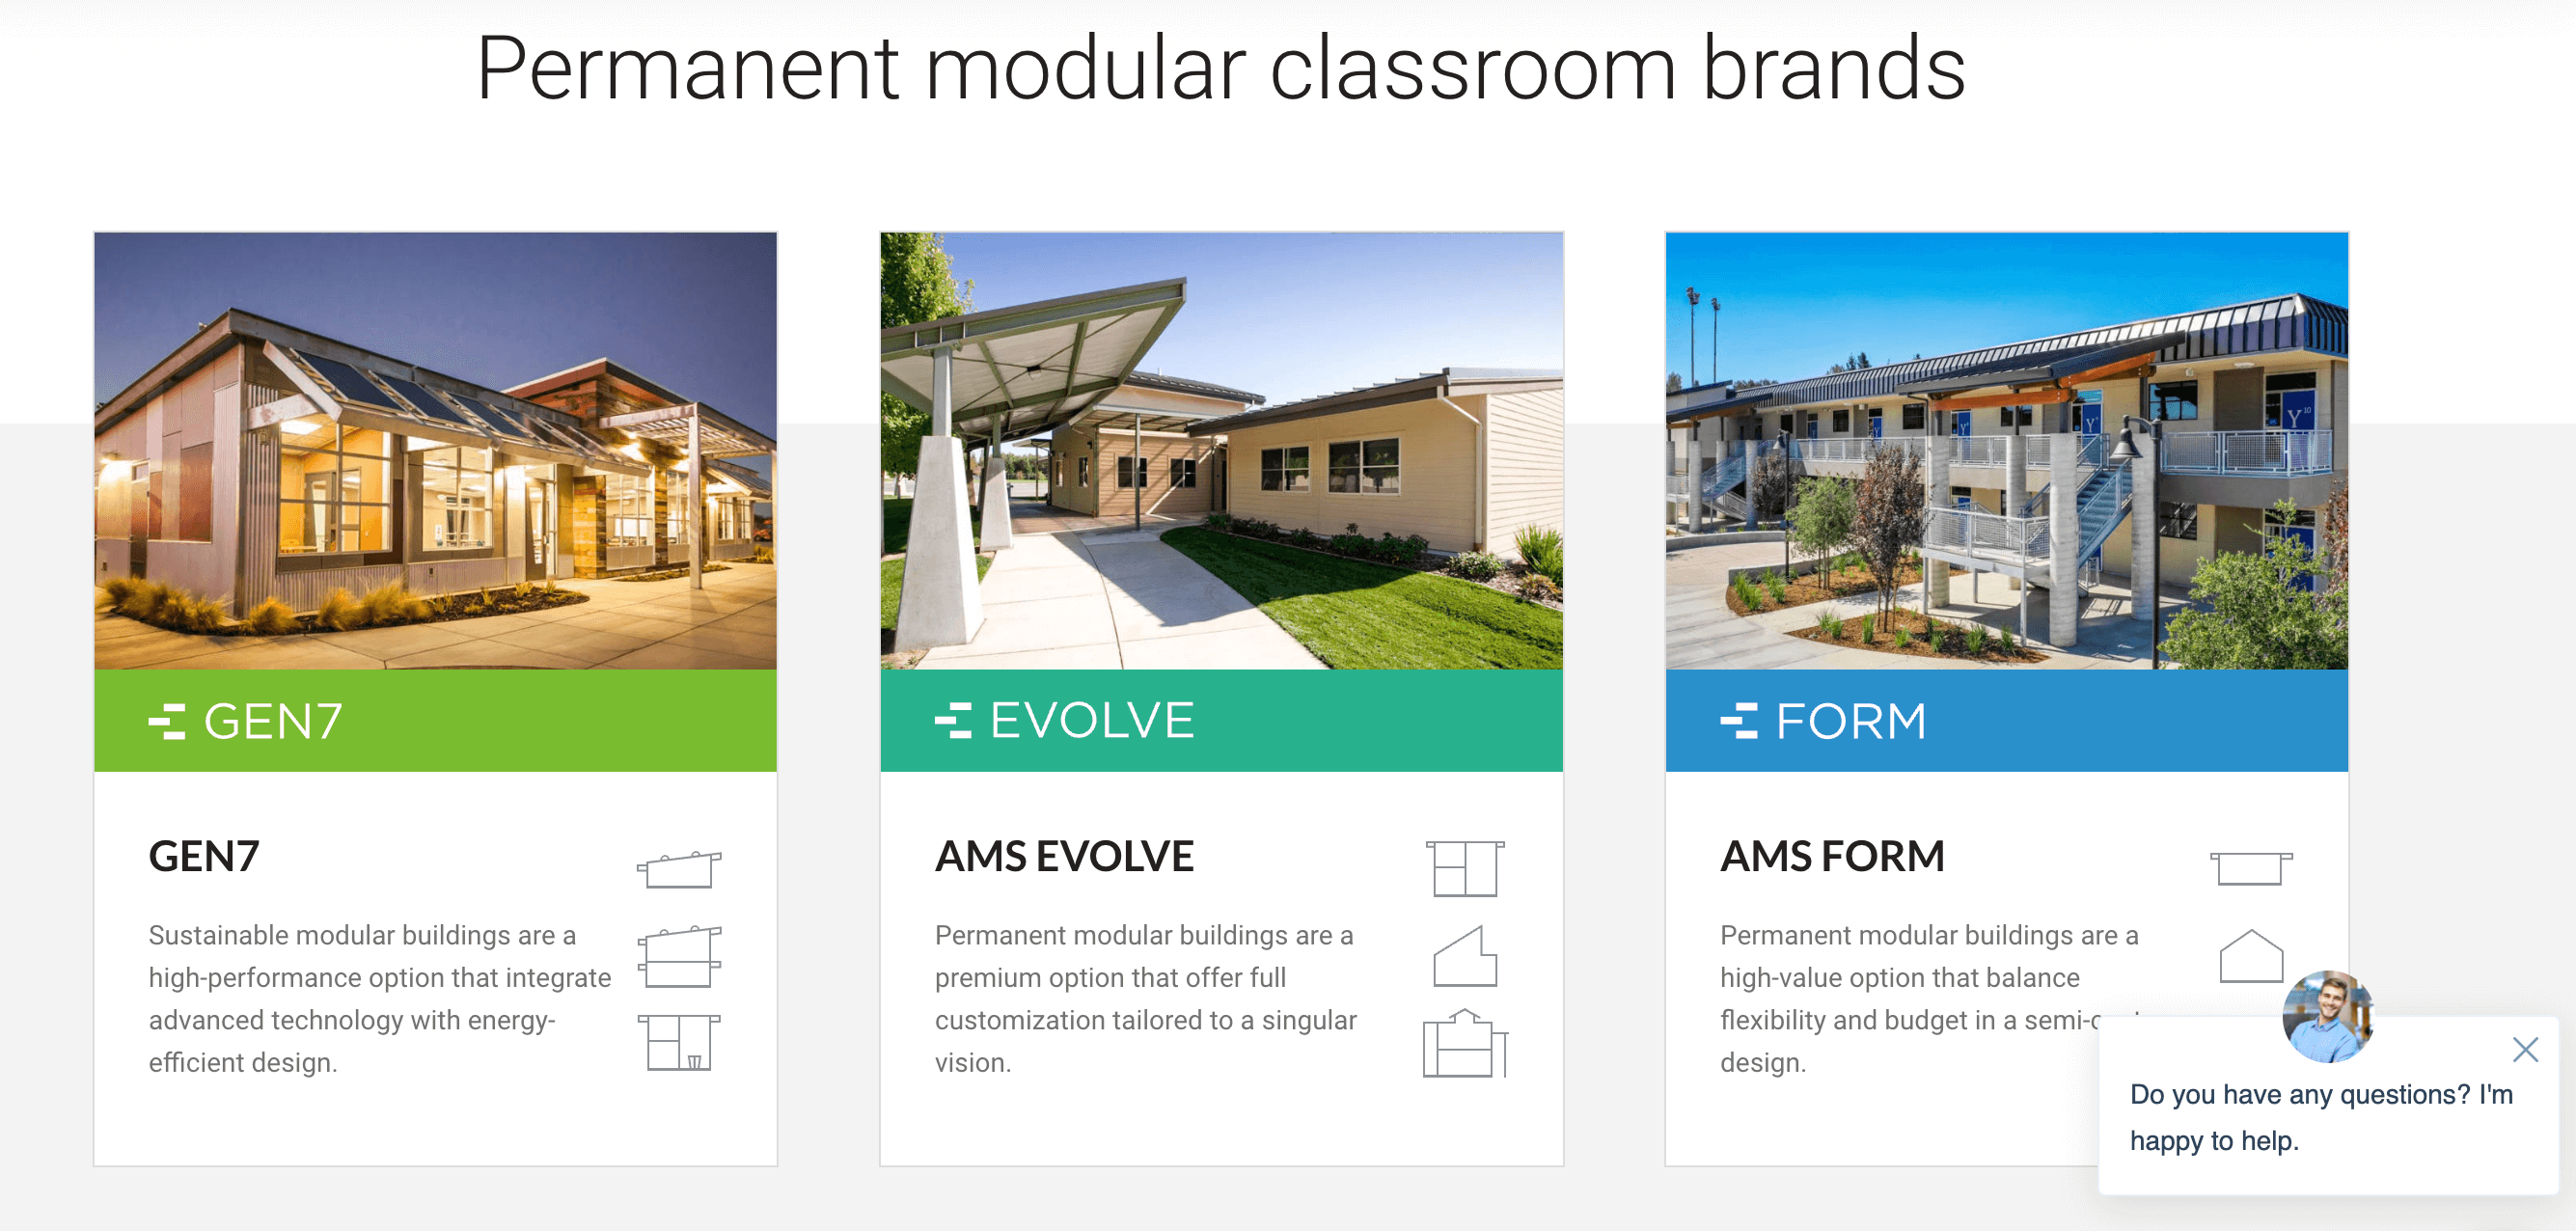 A screenshot of the American Modular Systems website. There are three image cards with photographs of different kinds of modular classrooms.